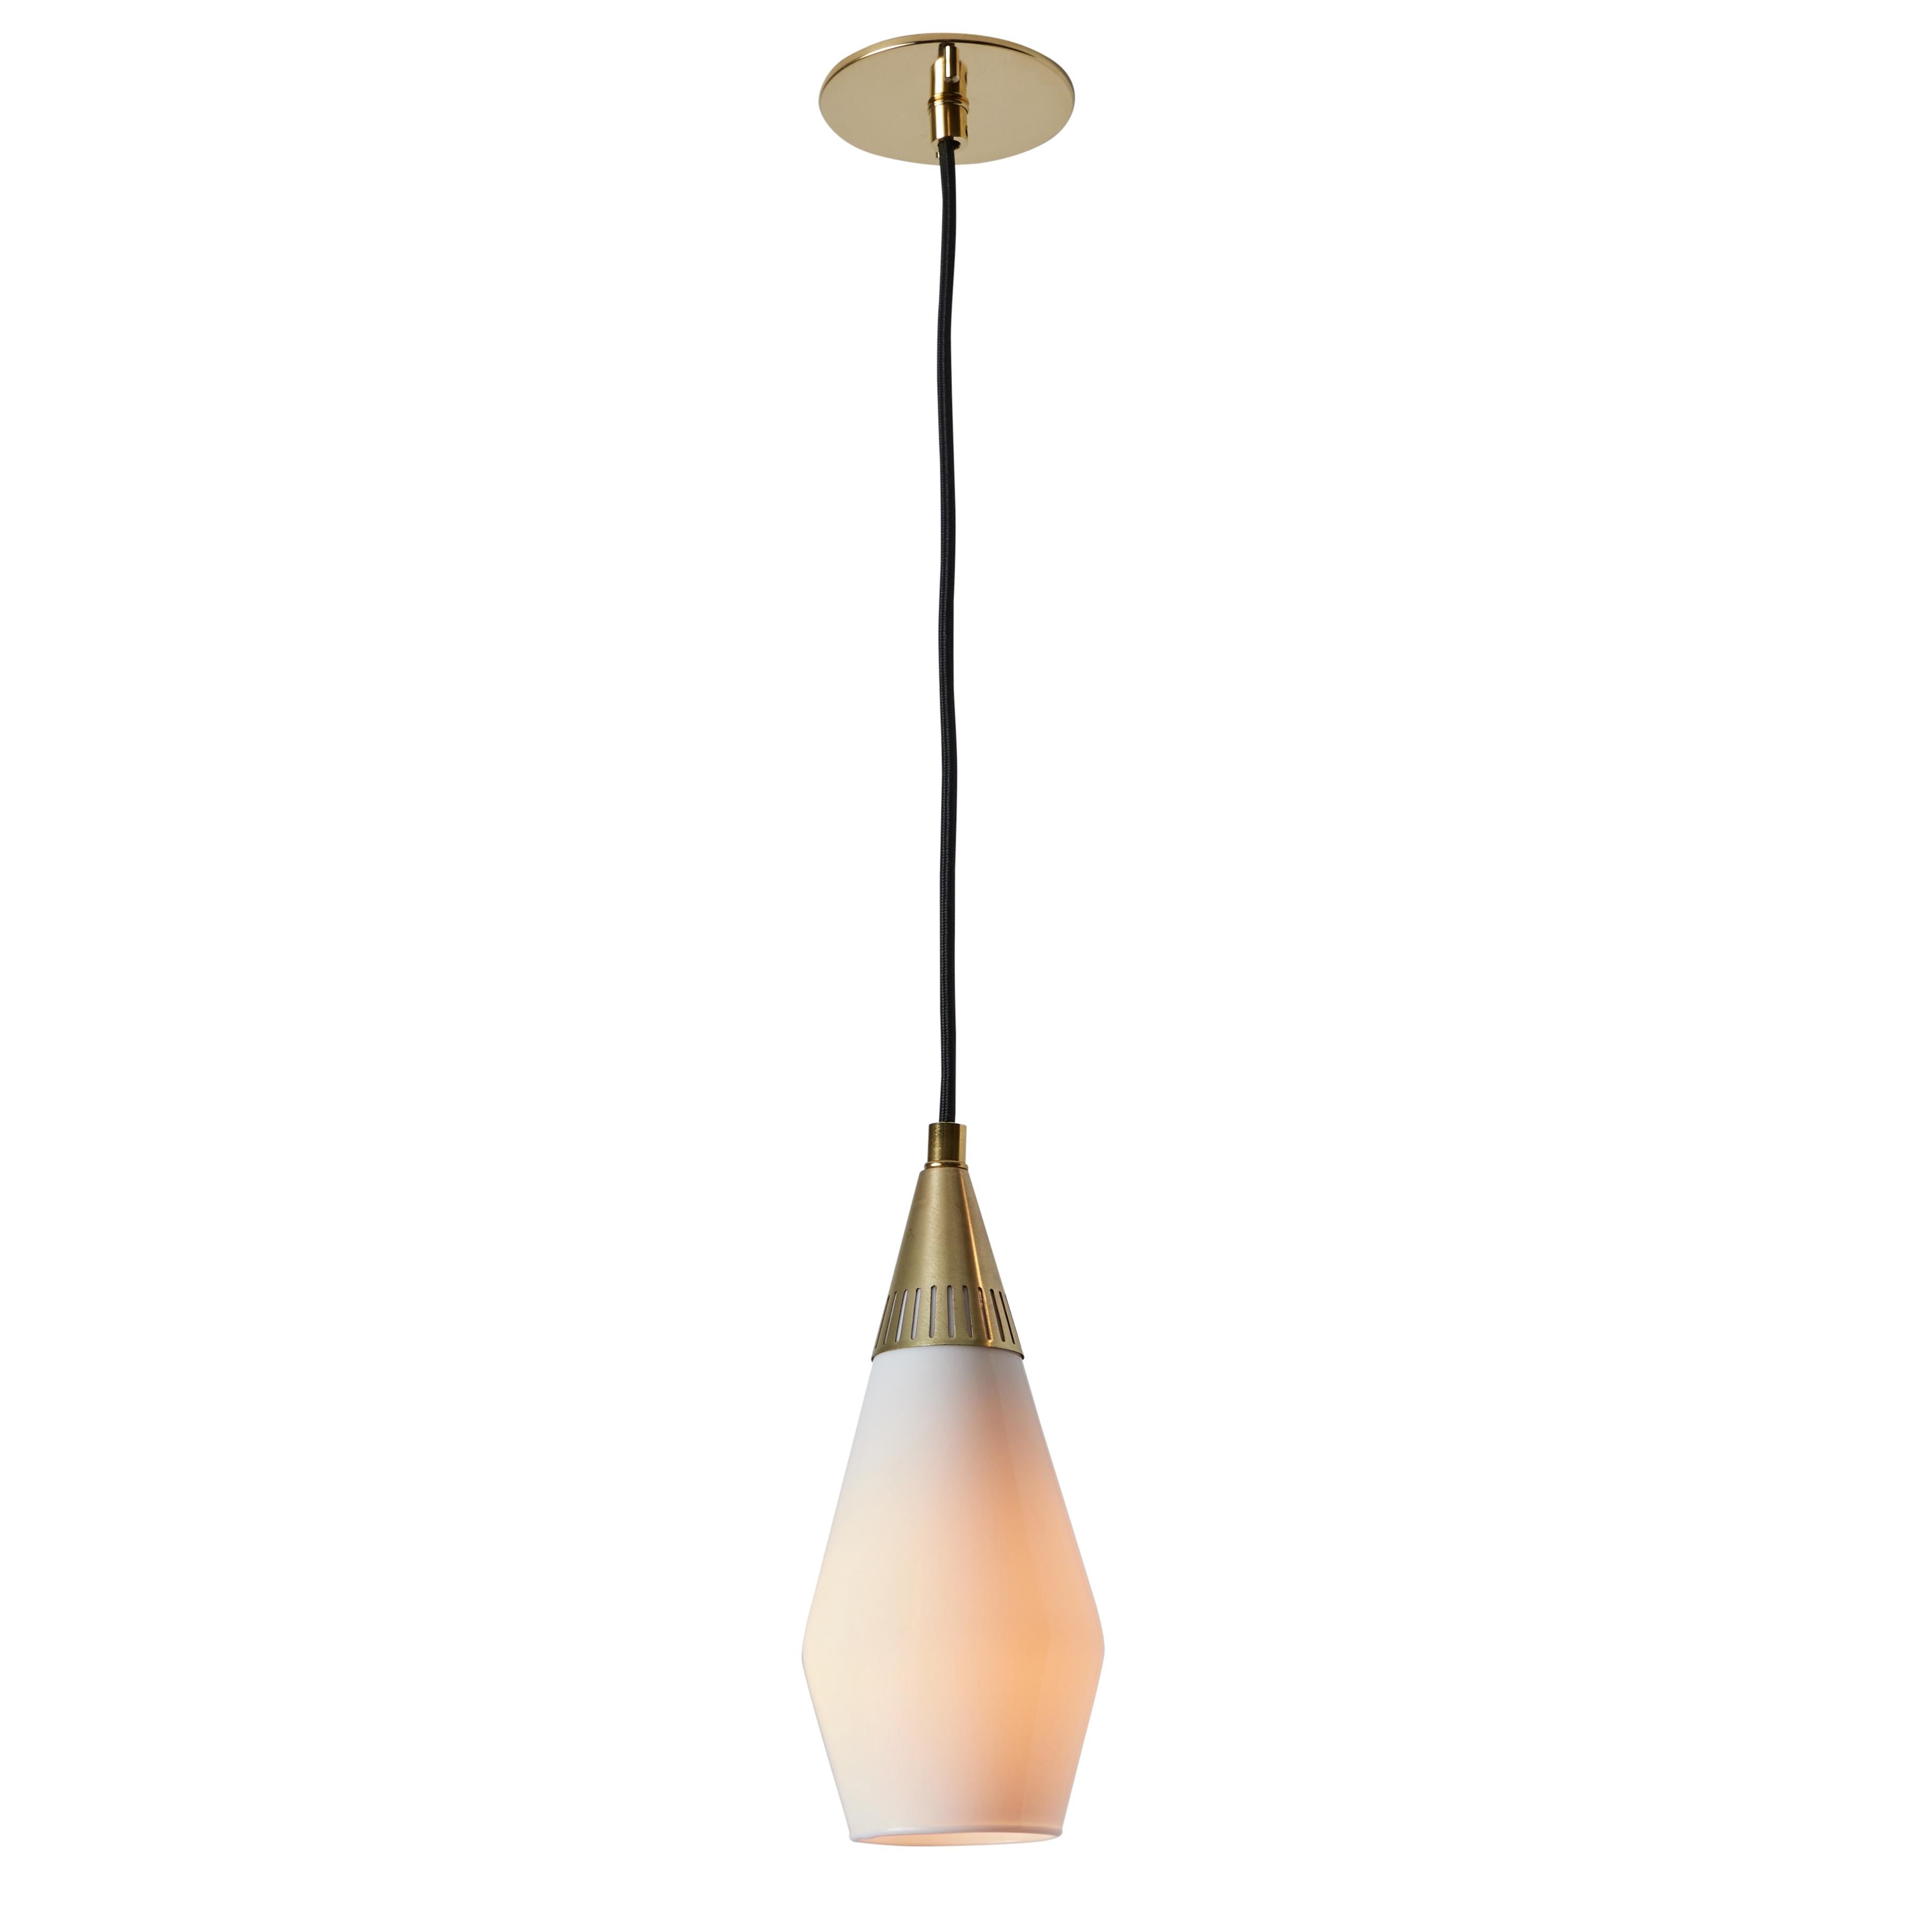 1960s Opaline Glass and Brass Geometric Pendant Lamp Attributed to Mauri Almari For Sale 4